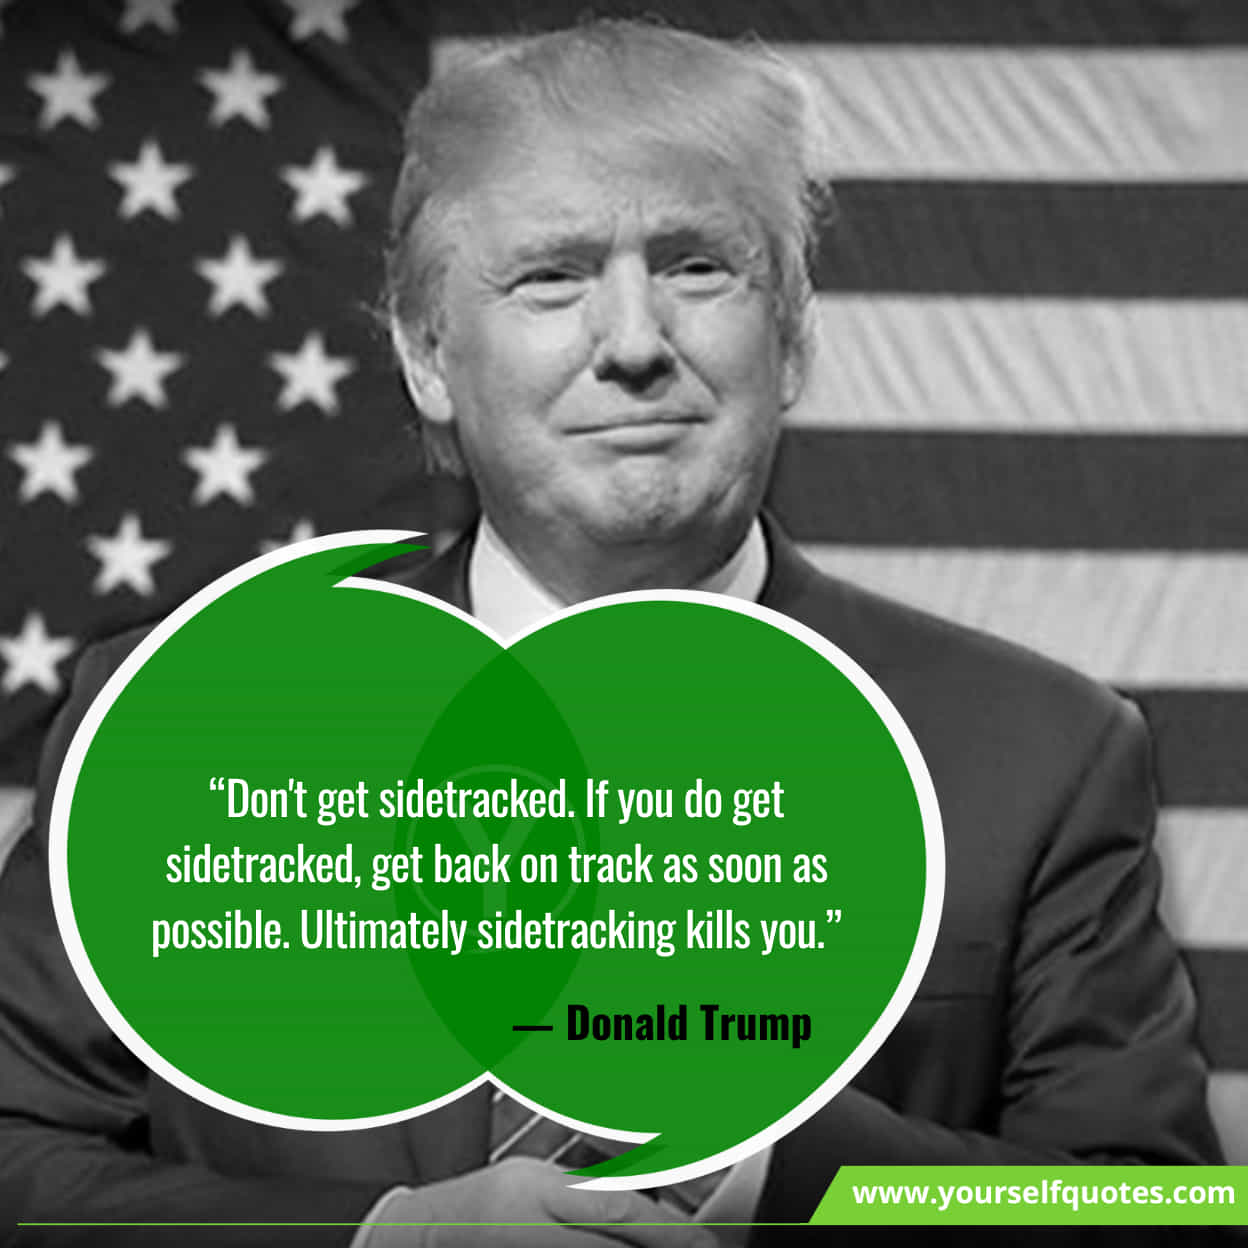 Quotes by Donald Trump on politics